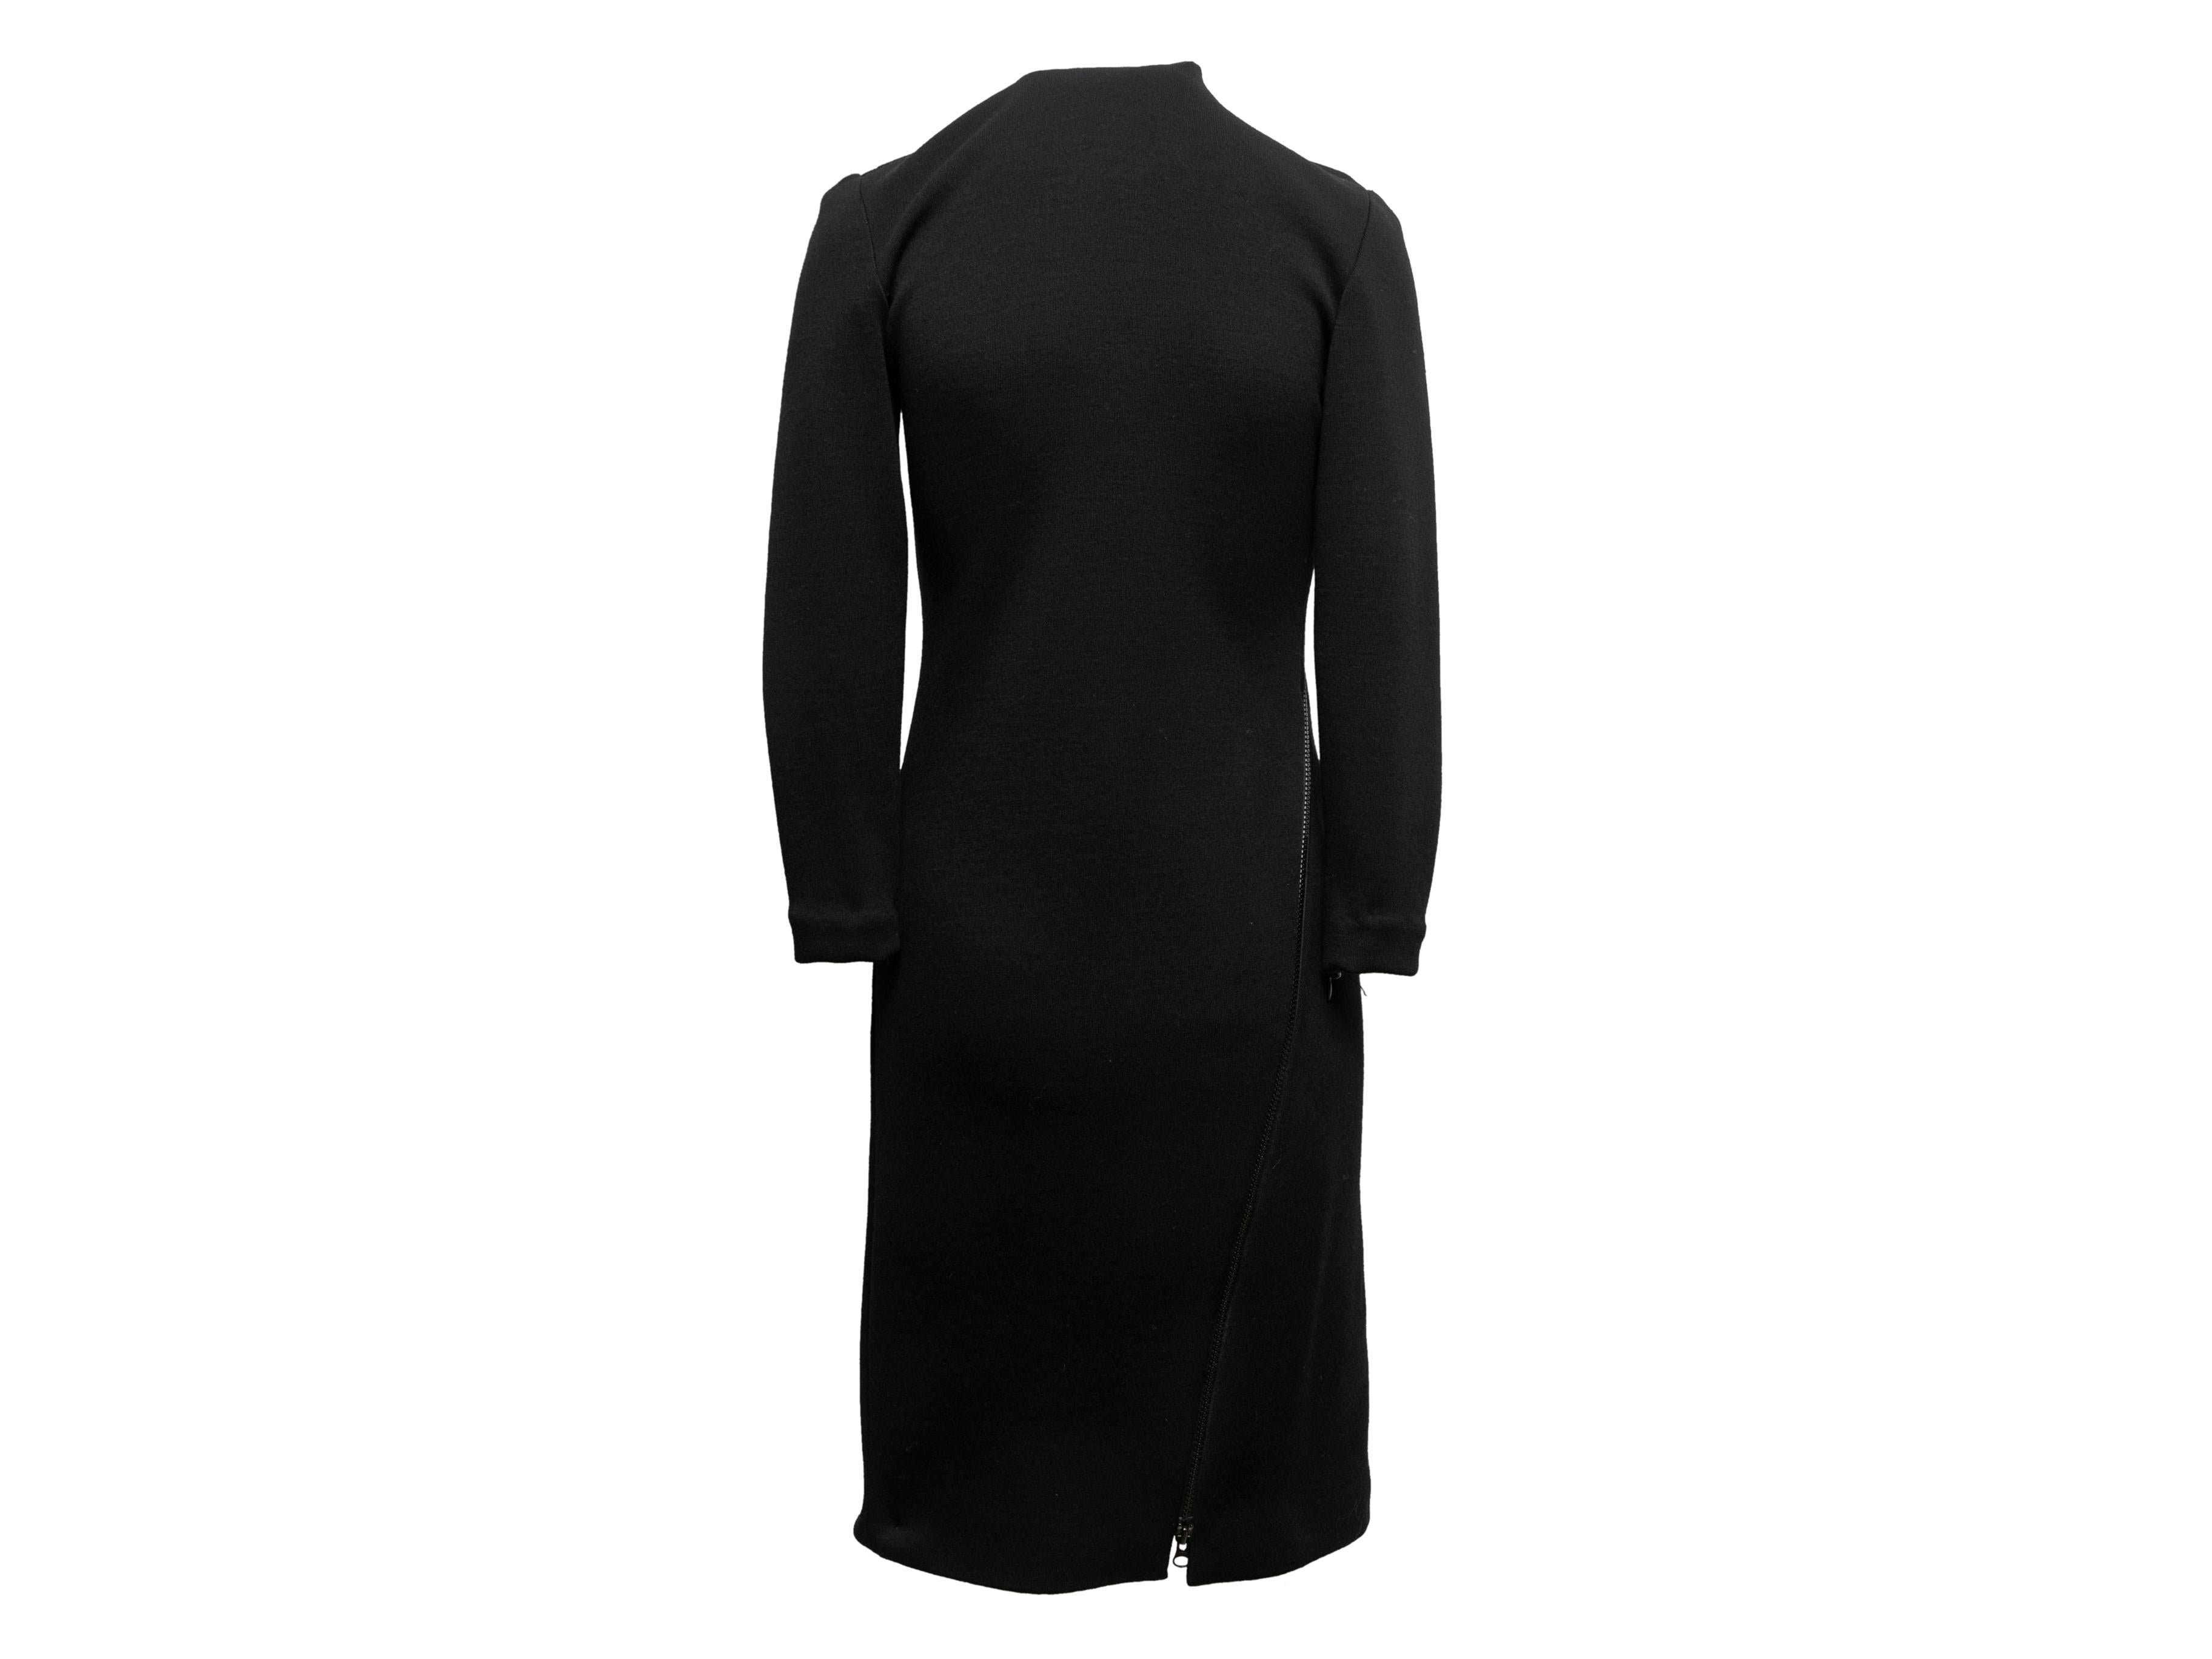 Vintage Black Geoffrey Beene Long Sleeve Dress Size US S In Good Condition For Sale In New York, NY